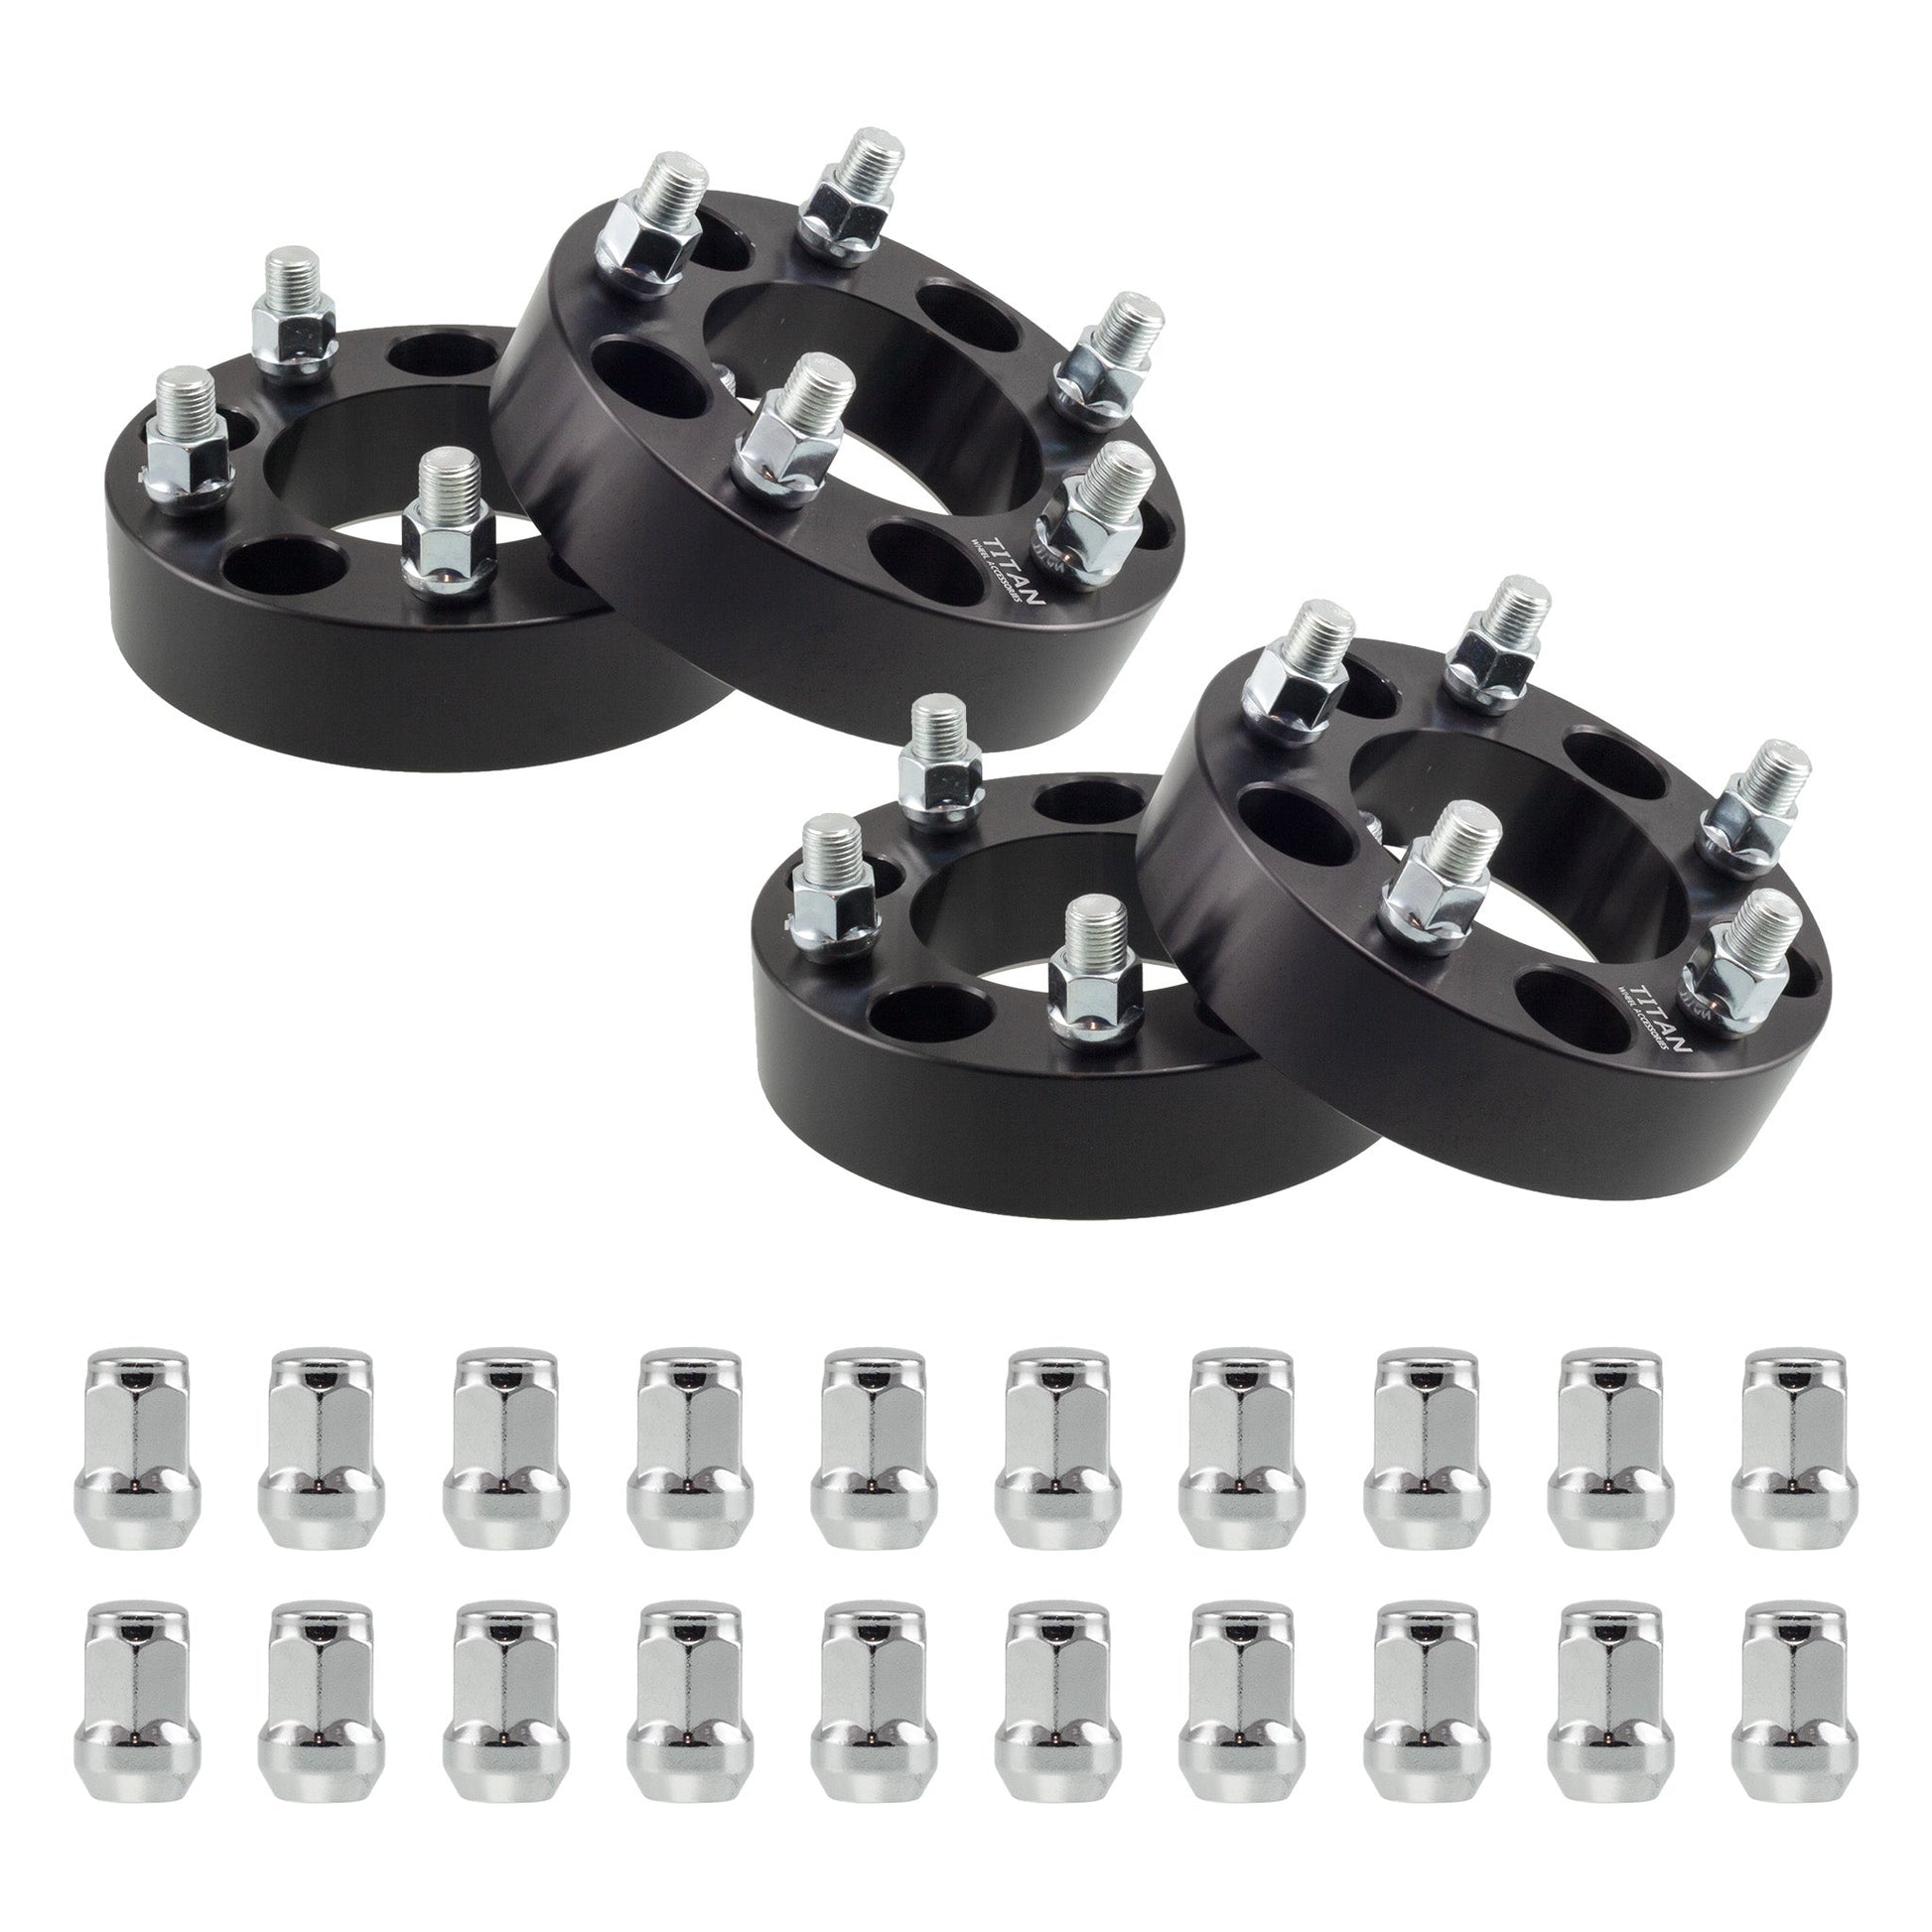 2" (50mm) Titan Wheel Spacers for Ford Mustang 2015+ | 5x4.5 (5x114.3) | 70.5 Hubcentric |14x1.5 Studs | Titan Wheel Accessories